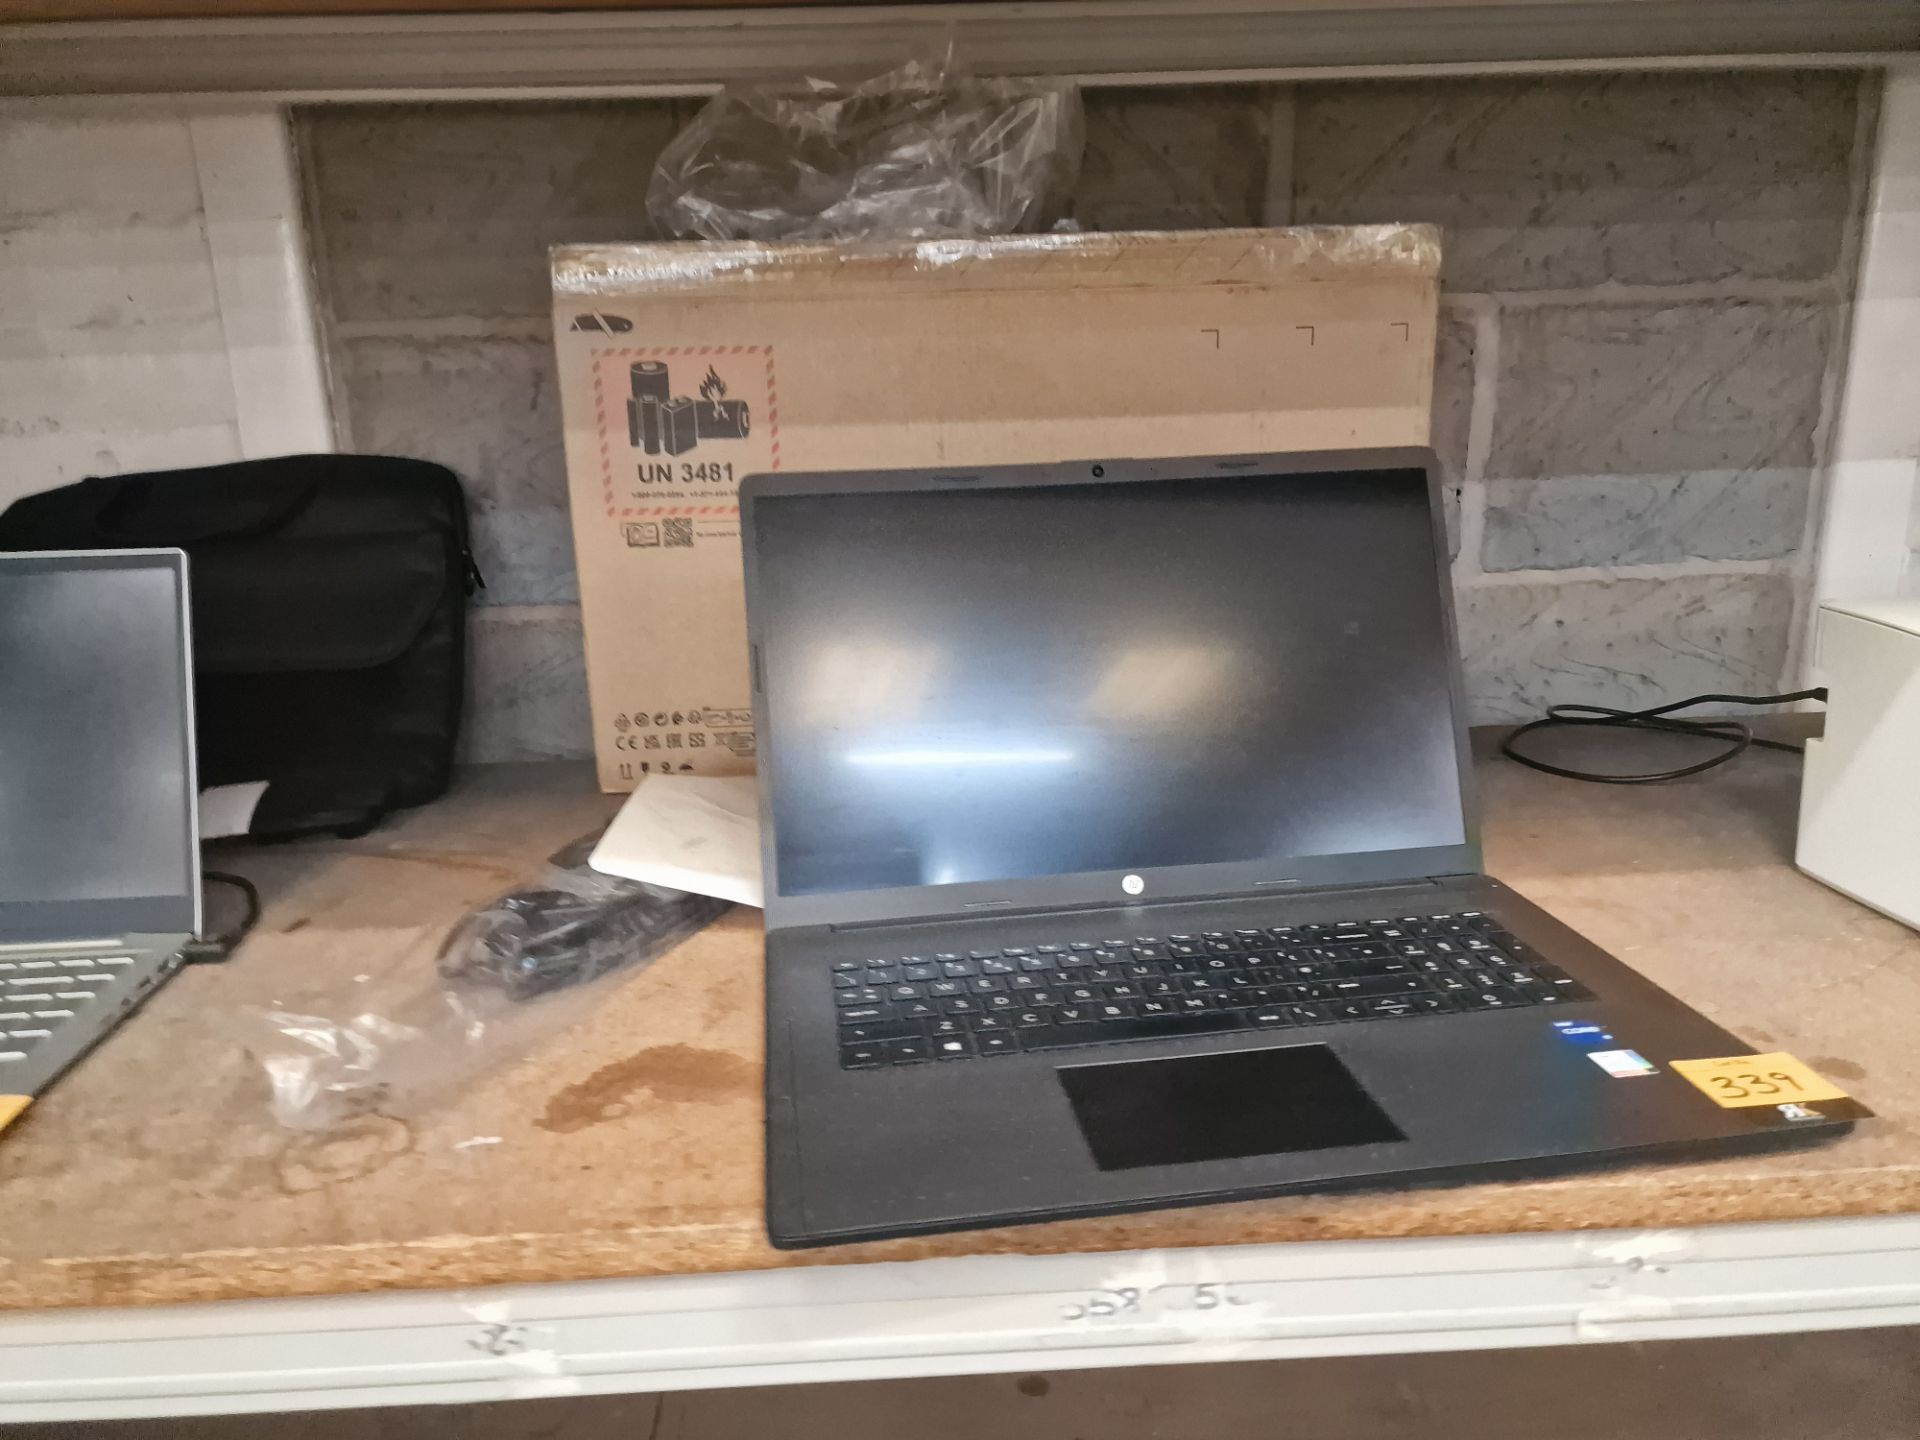 HP notebook computer model RTL8828CE, including power pack/charger and box